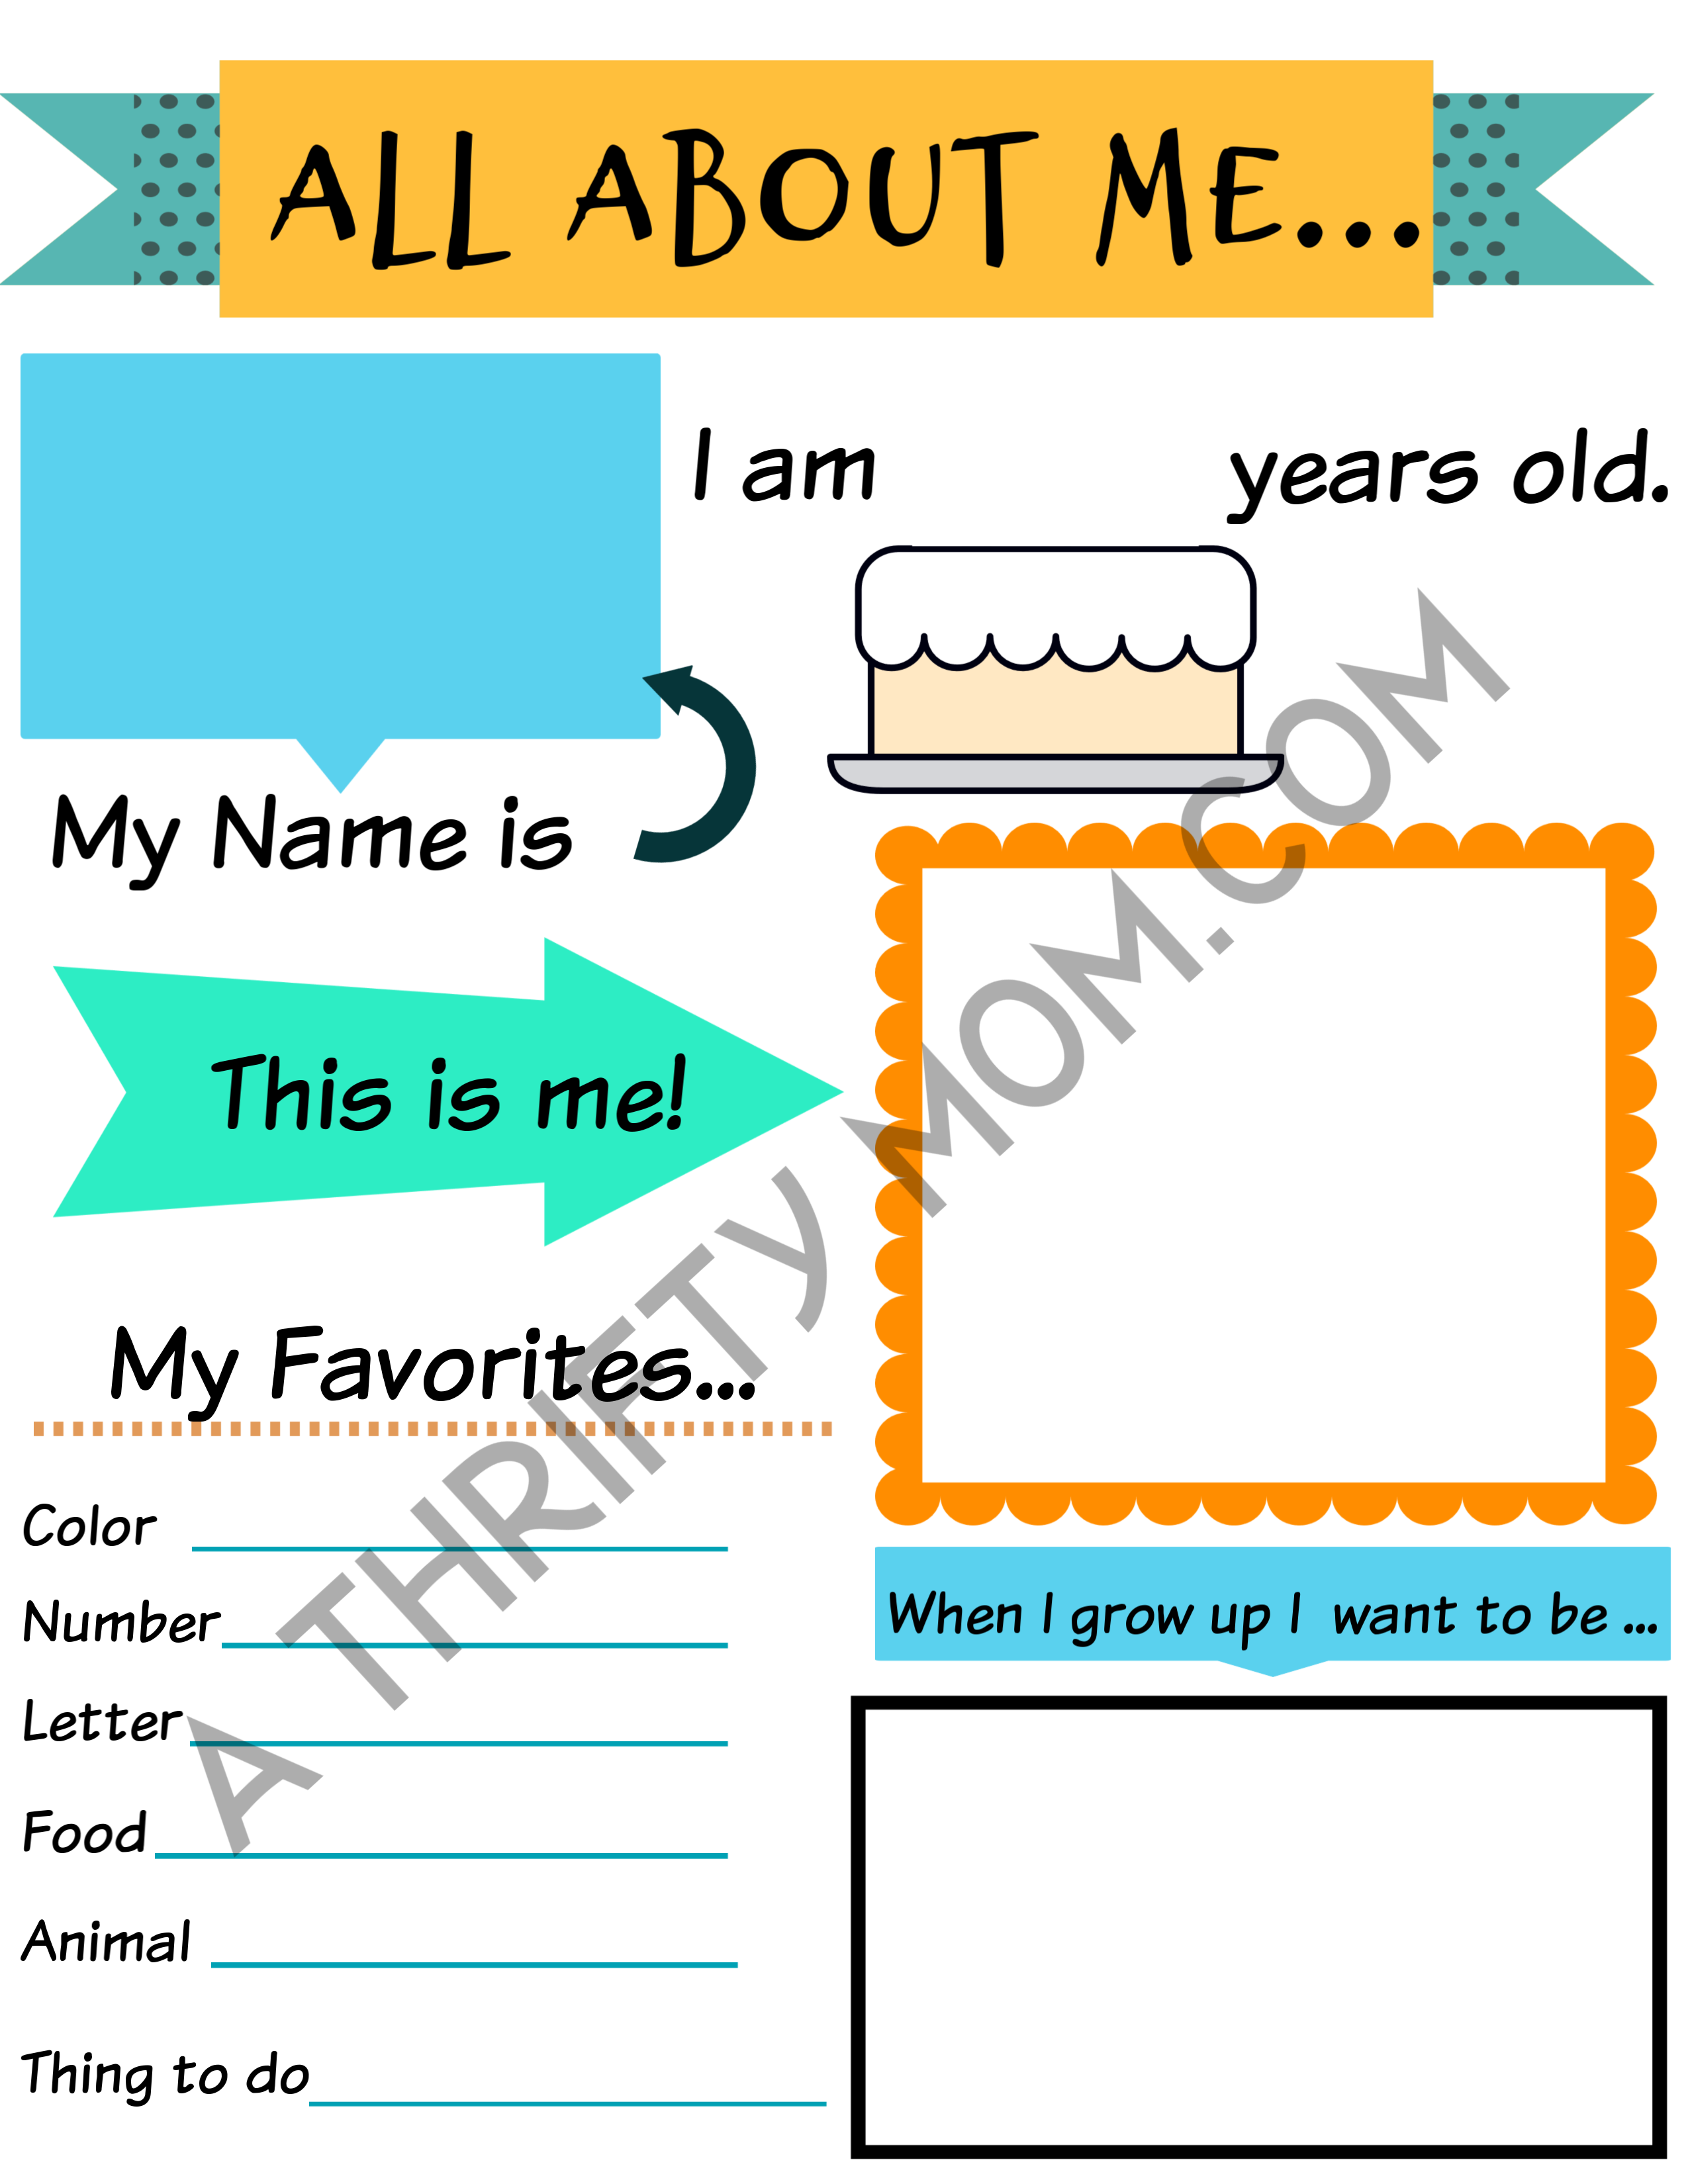 all-about-me-free-printable-preschool